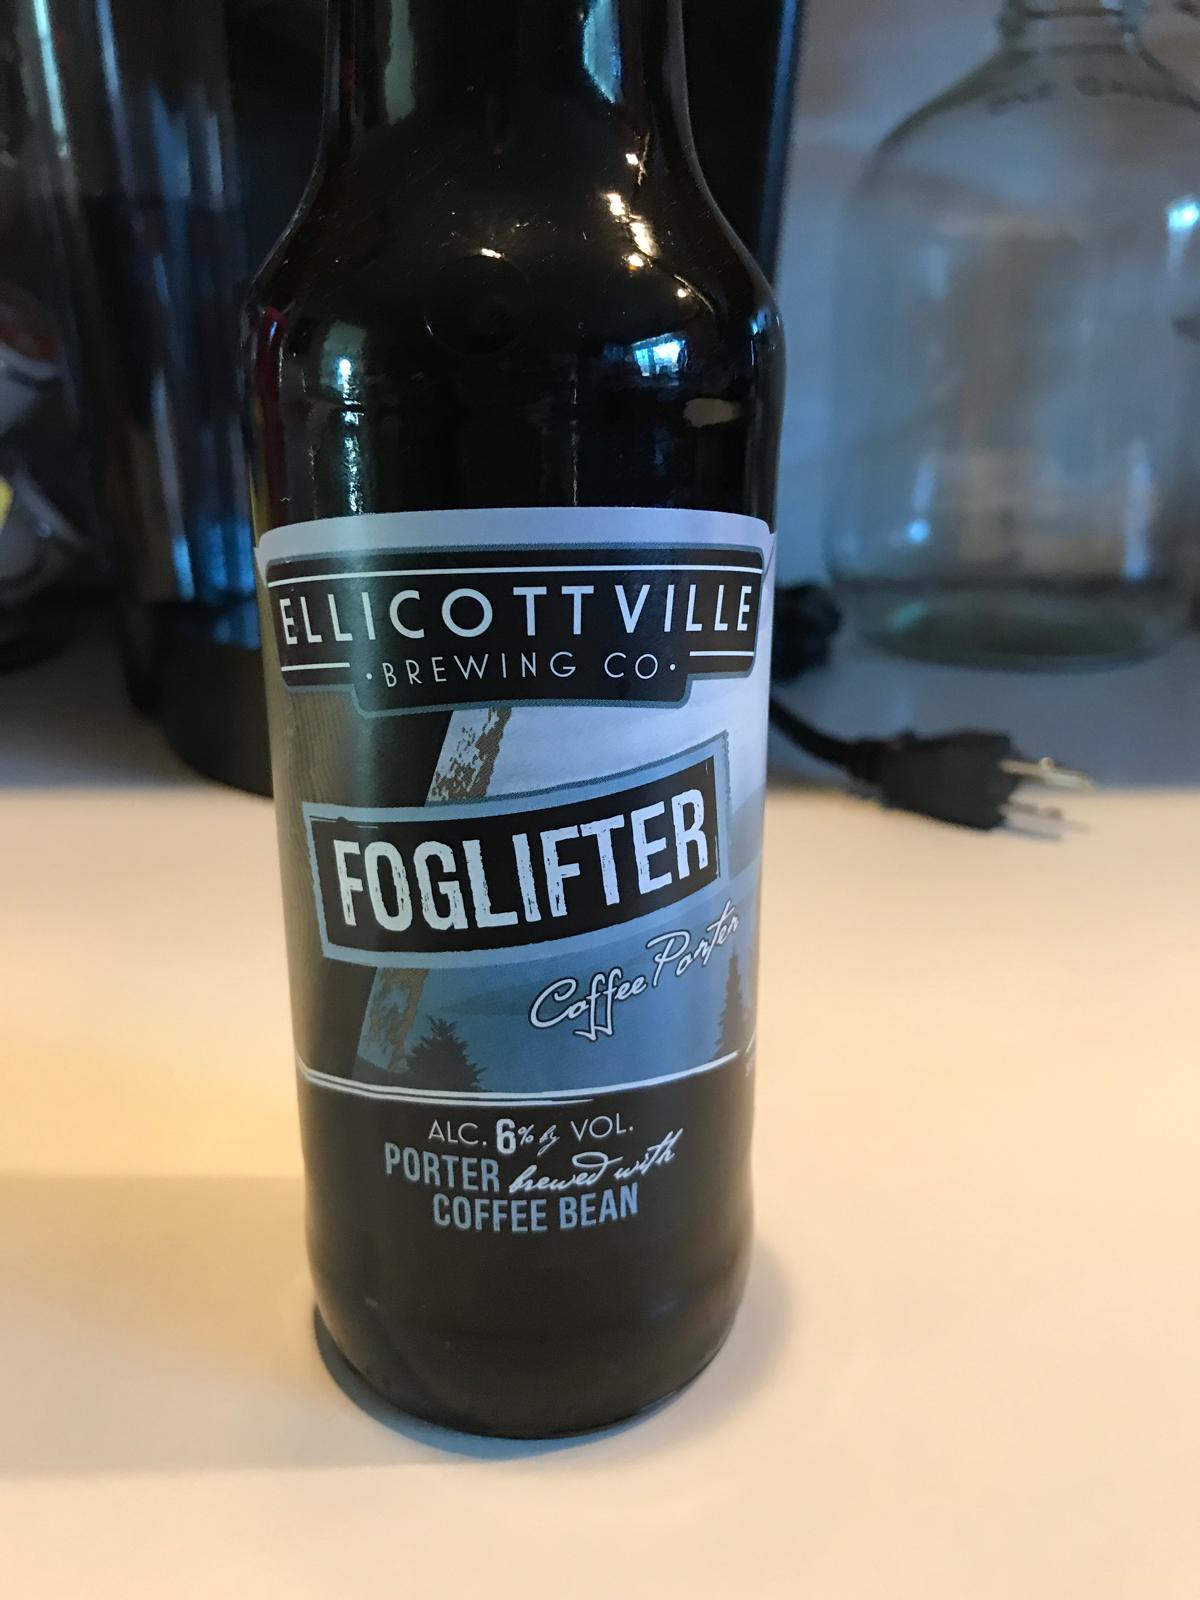 The Foglifter